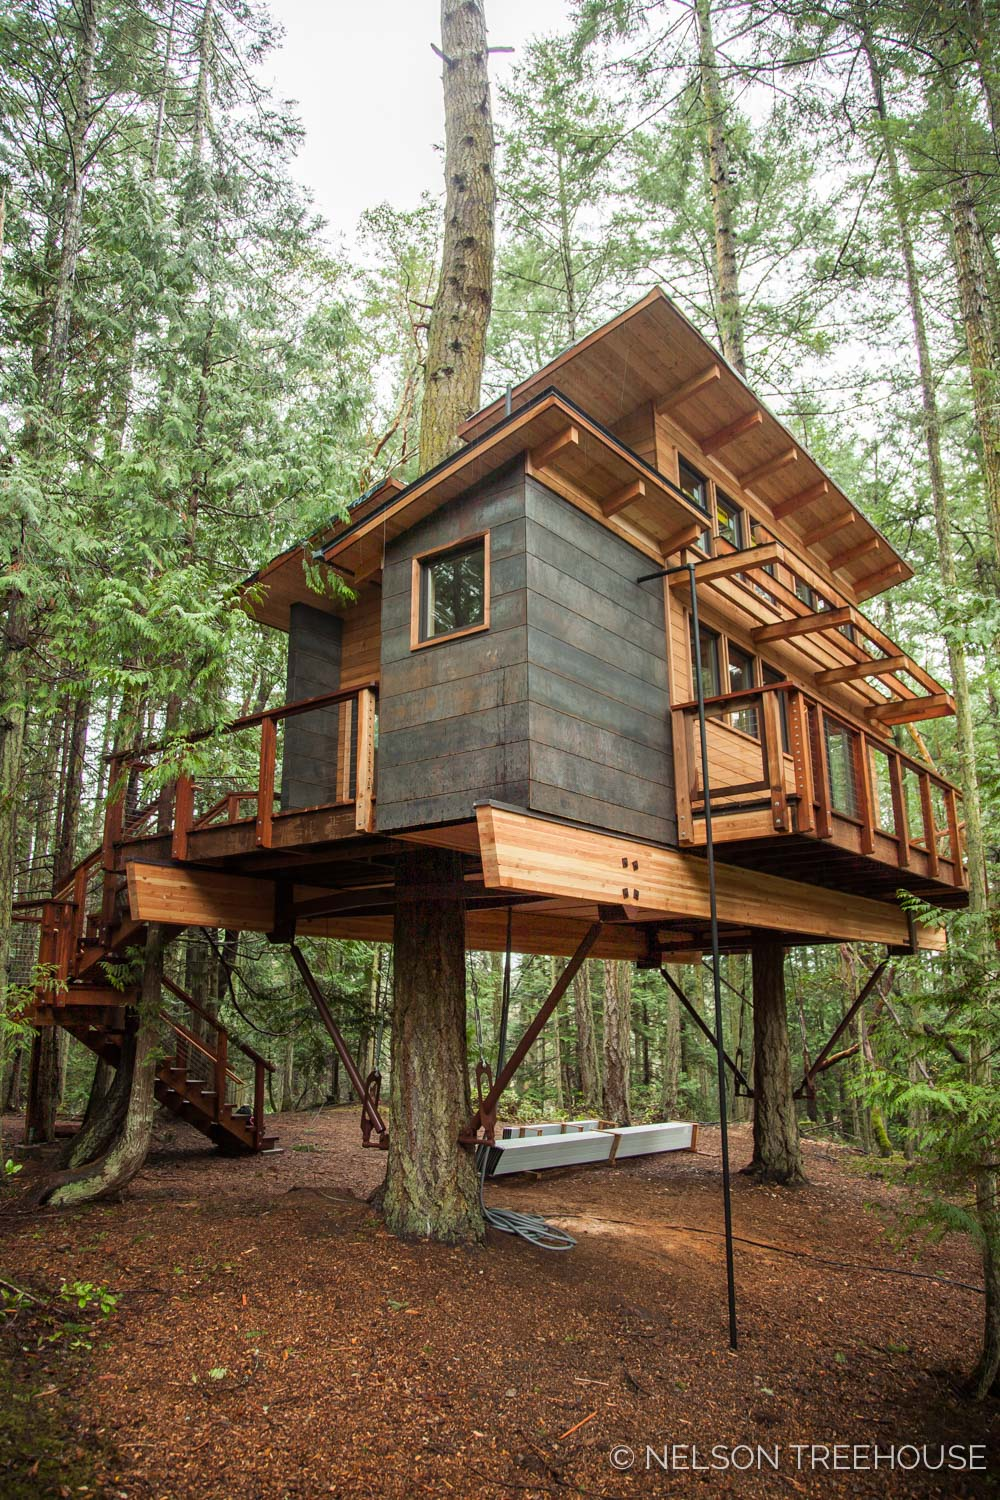 50 Inspiring Treehouse Plans And Design, Tree House Building Plans